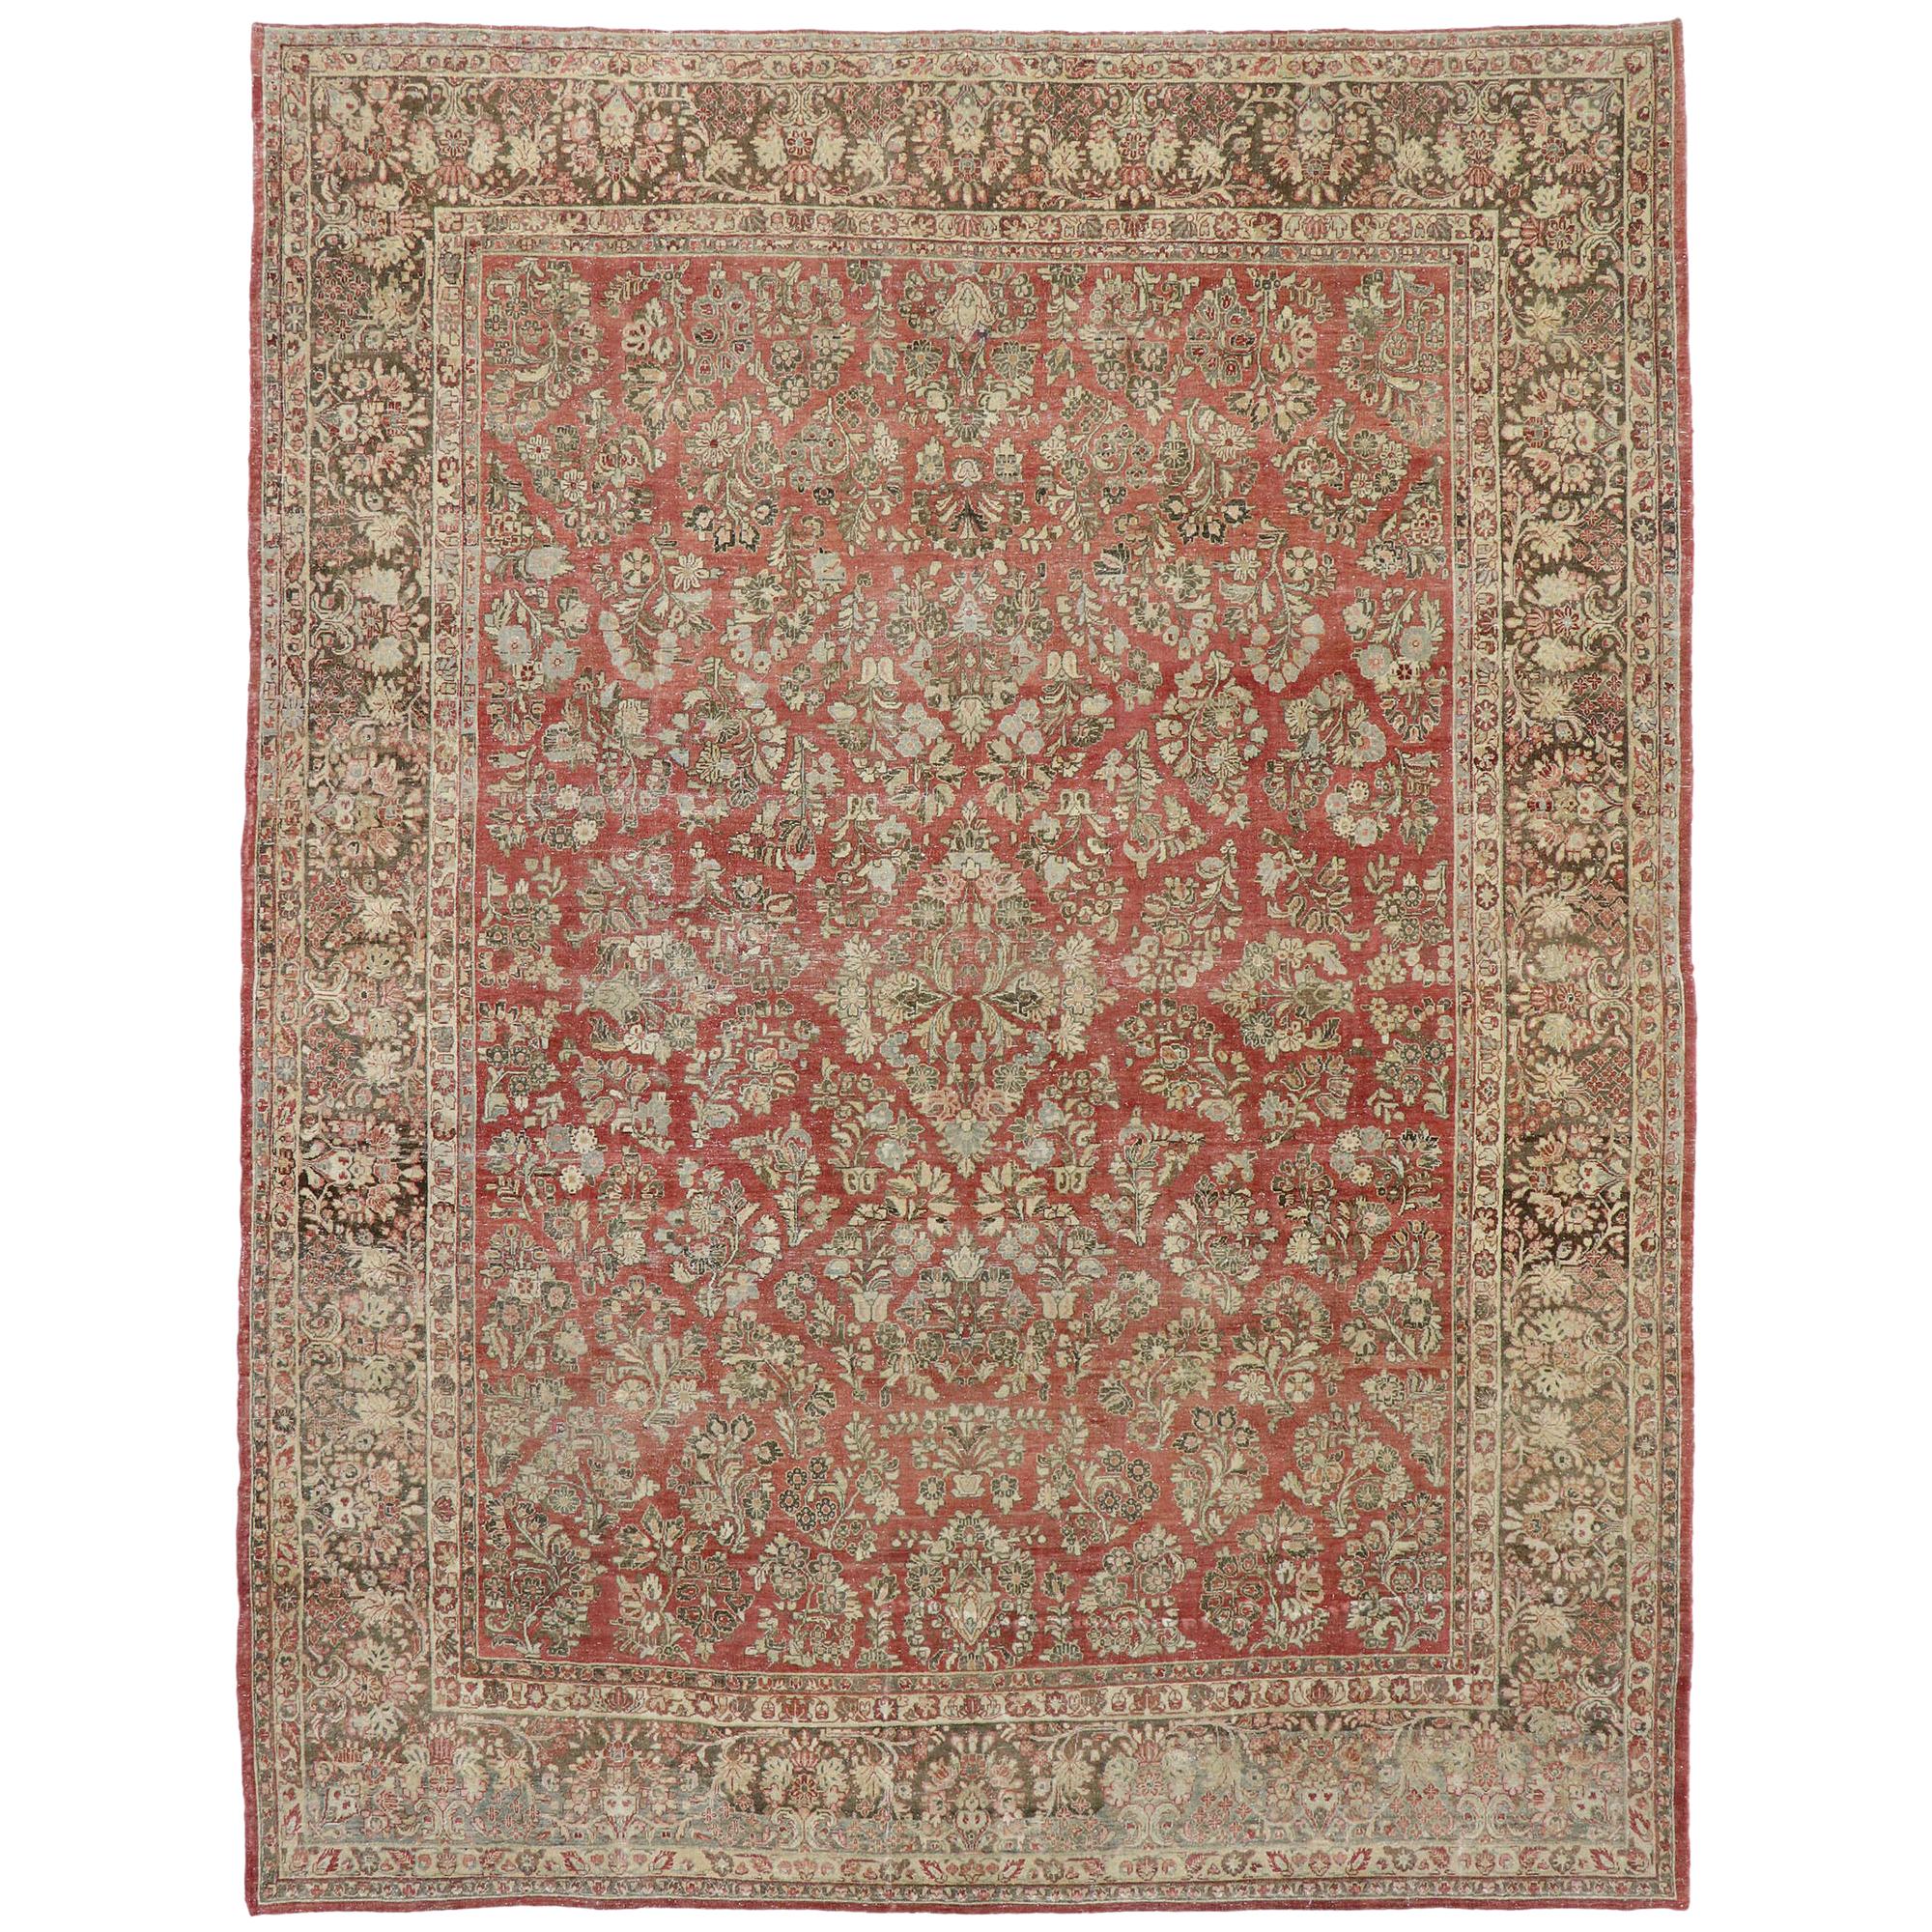 Distressed Antique Persian Sarouk Rug with Rustic American Traditional Style